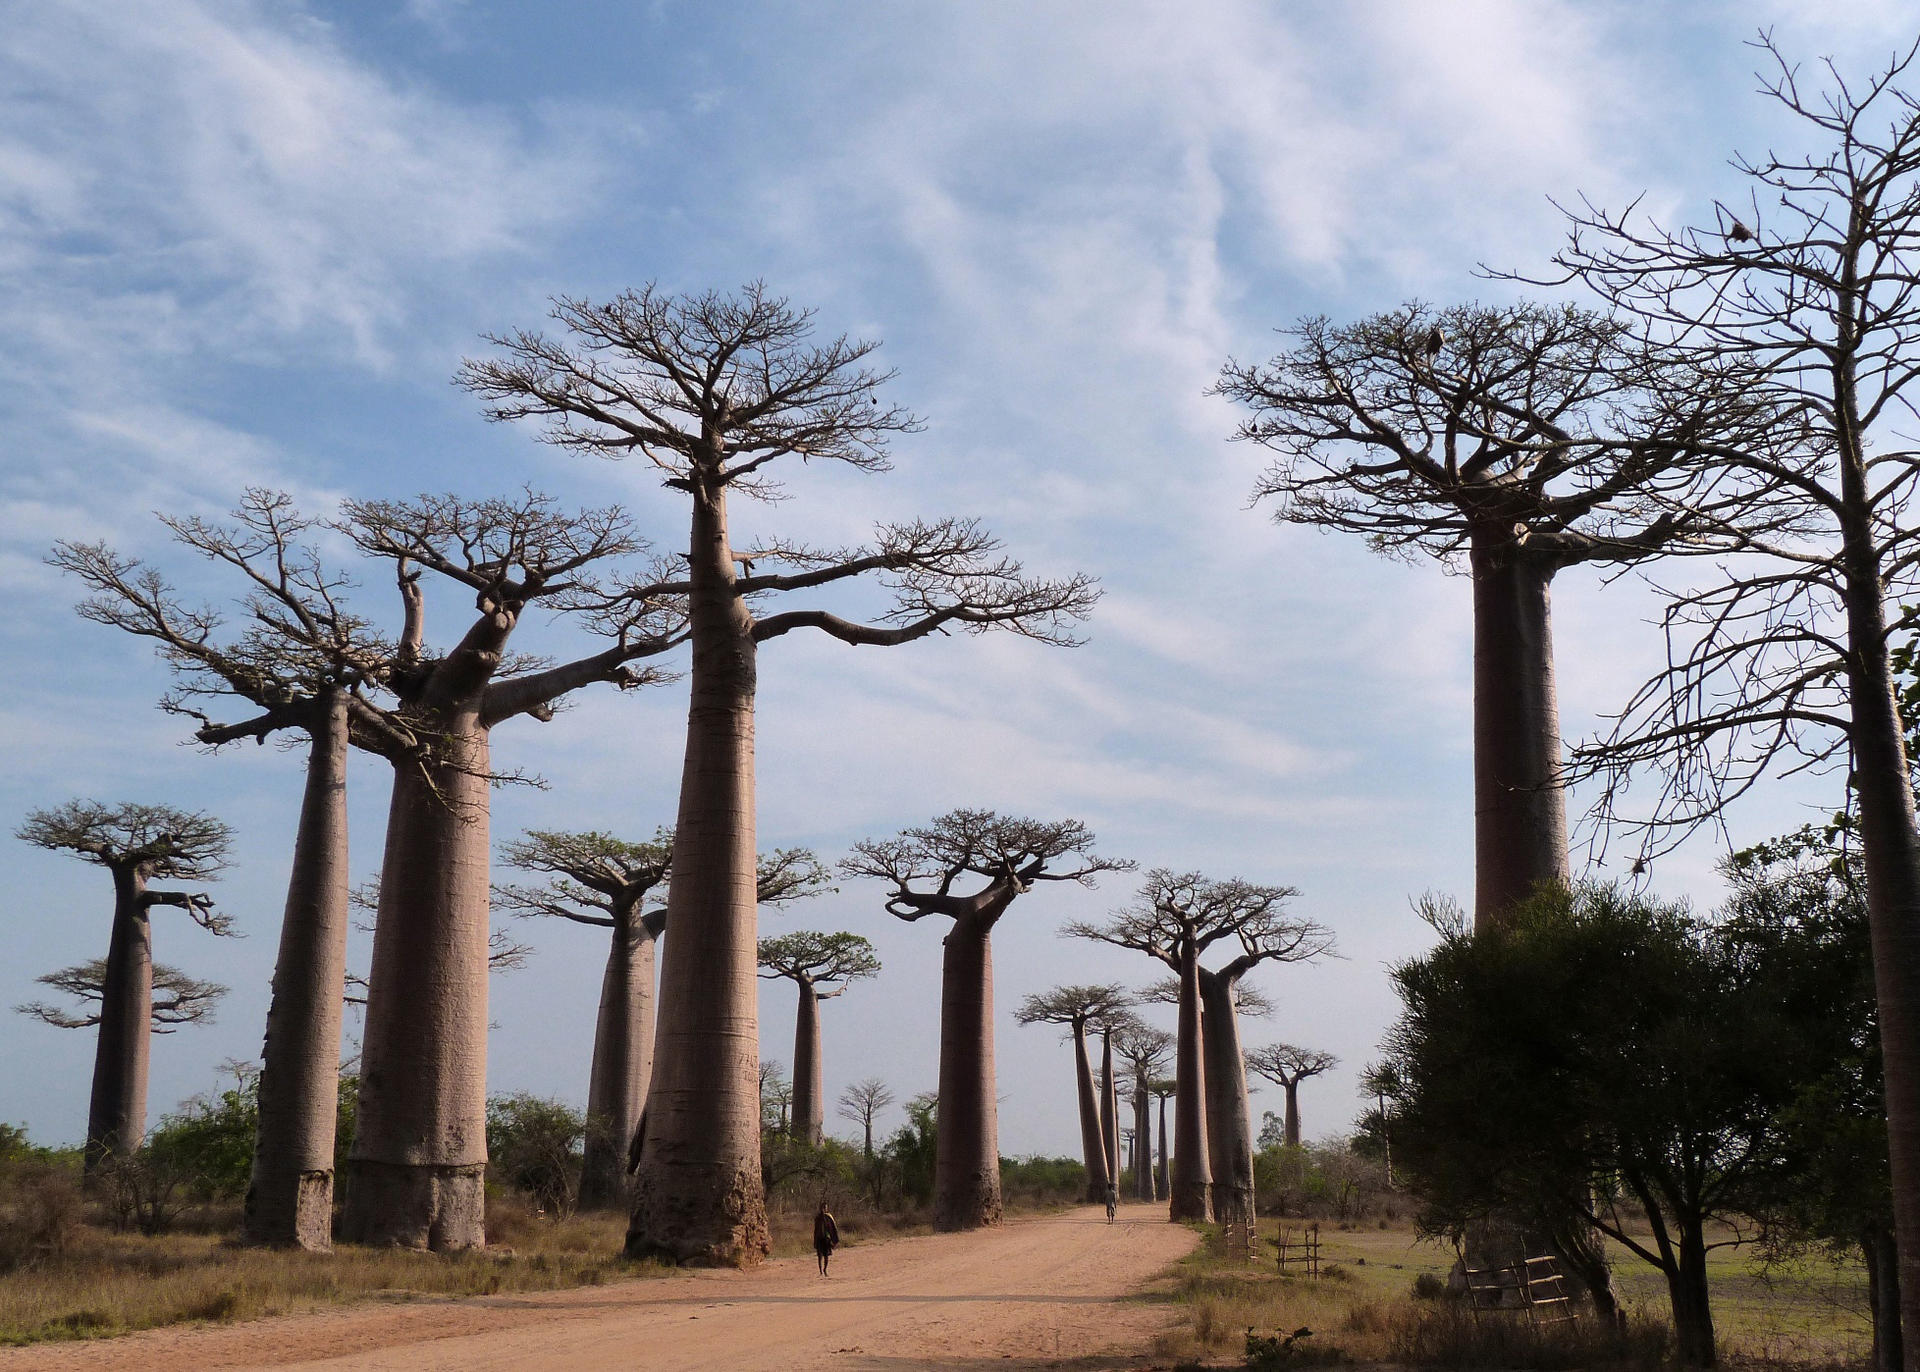 African baobabs are virtually indestructible life savers in the arid regions they inhabit.